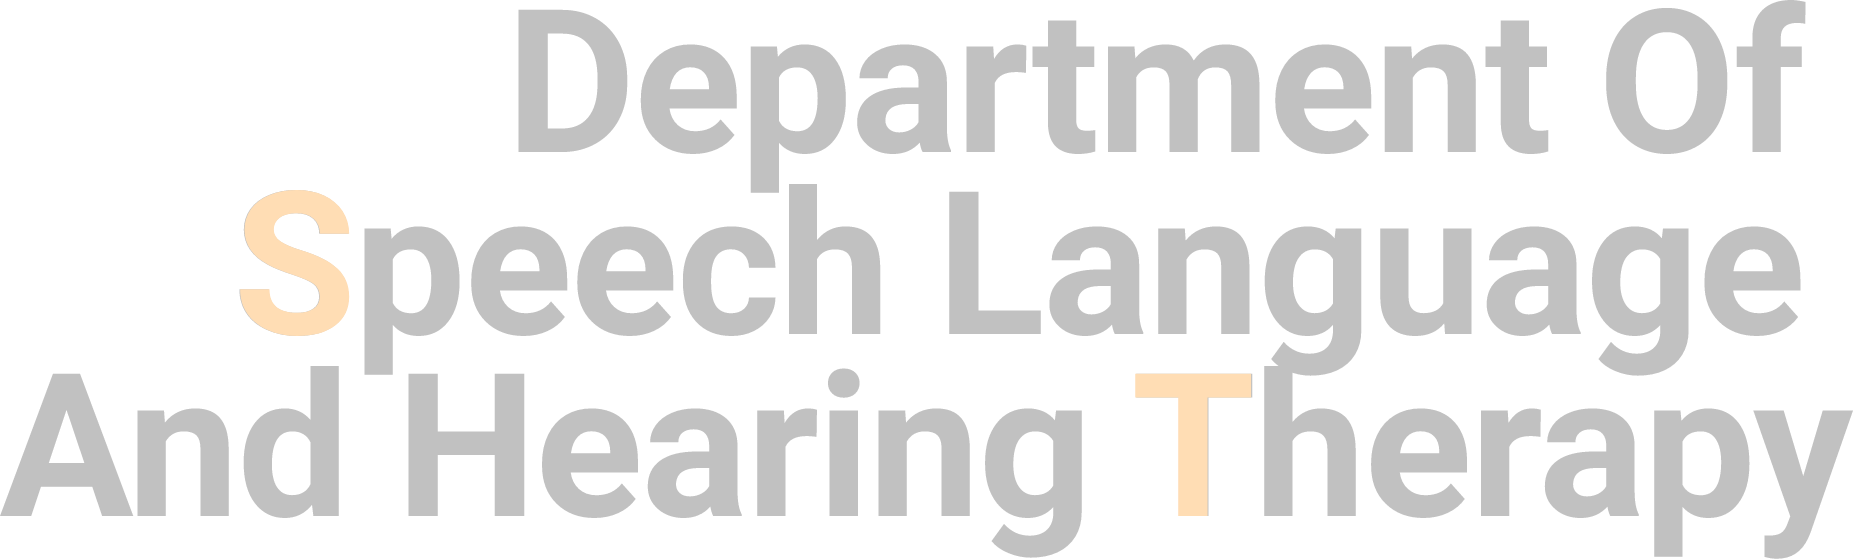 Department Of Speech Language And Hearing Therapy